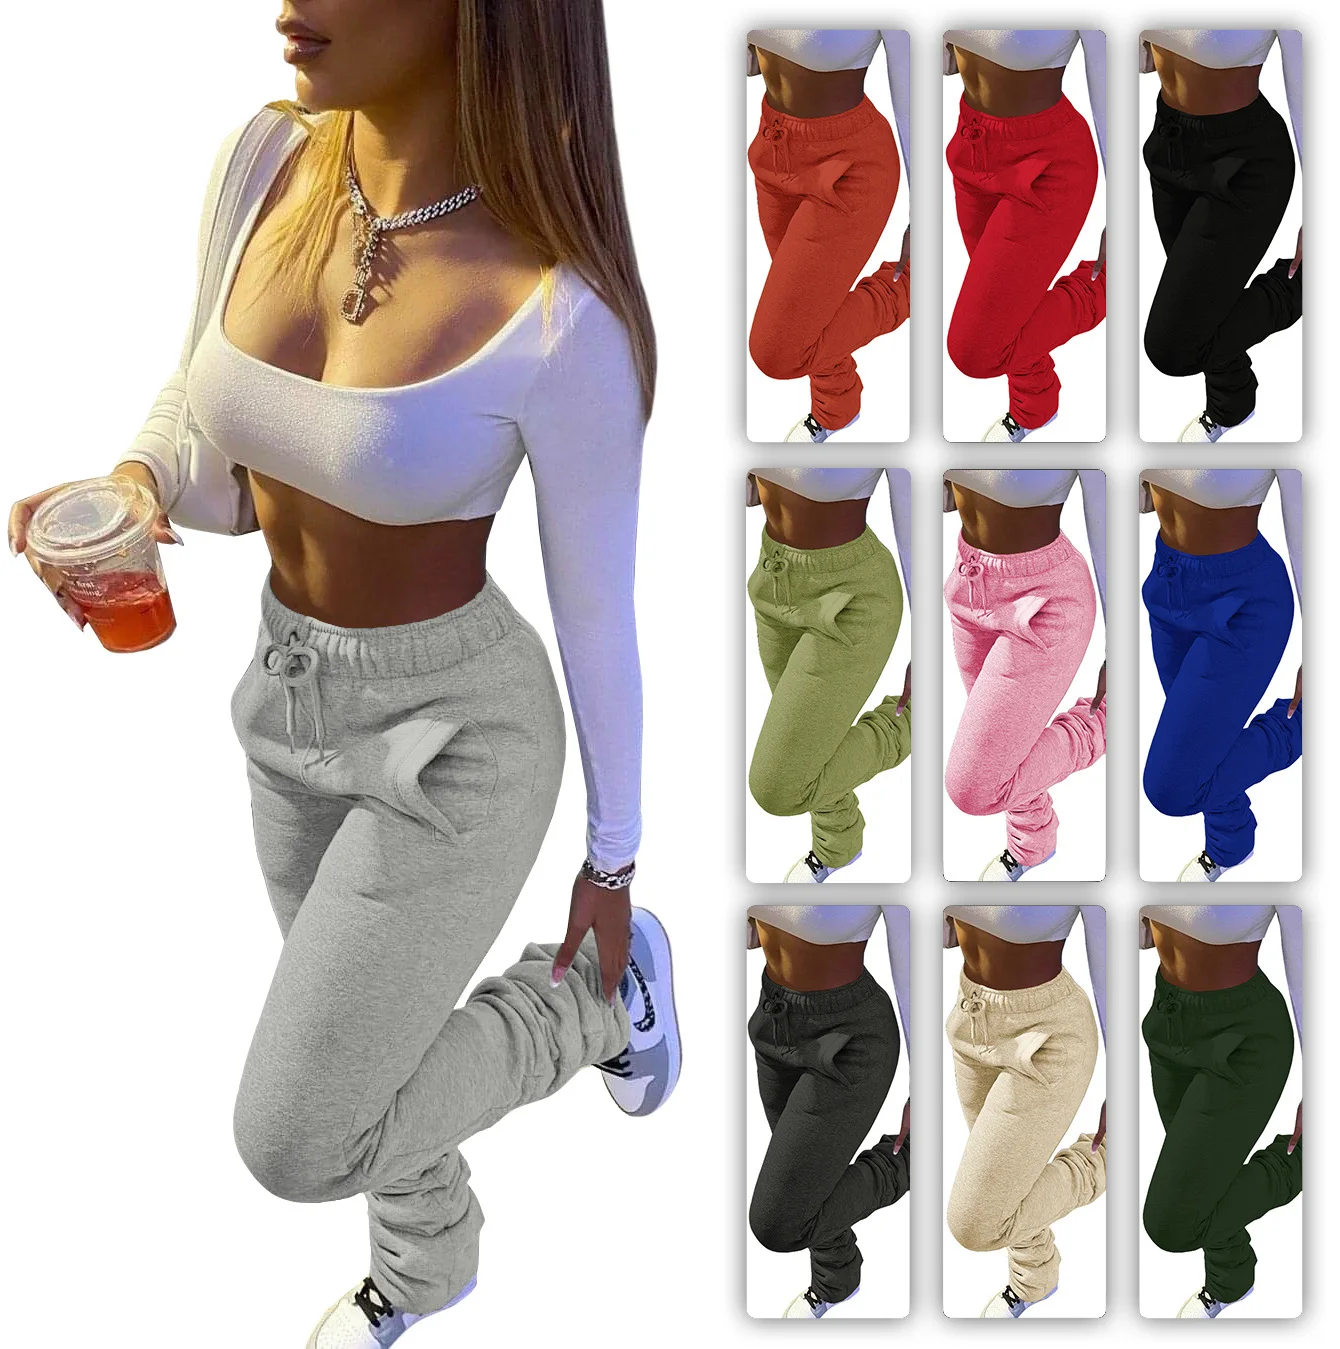 Europe and America women's padded sweater fabric sports and leisure drawstring pile pants pants with pockets.